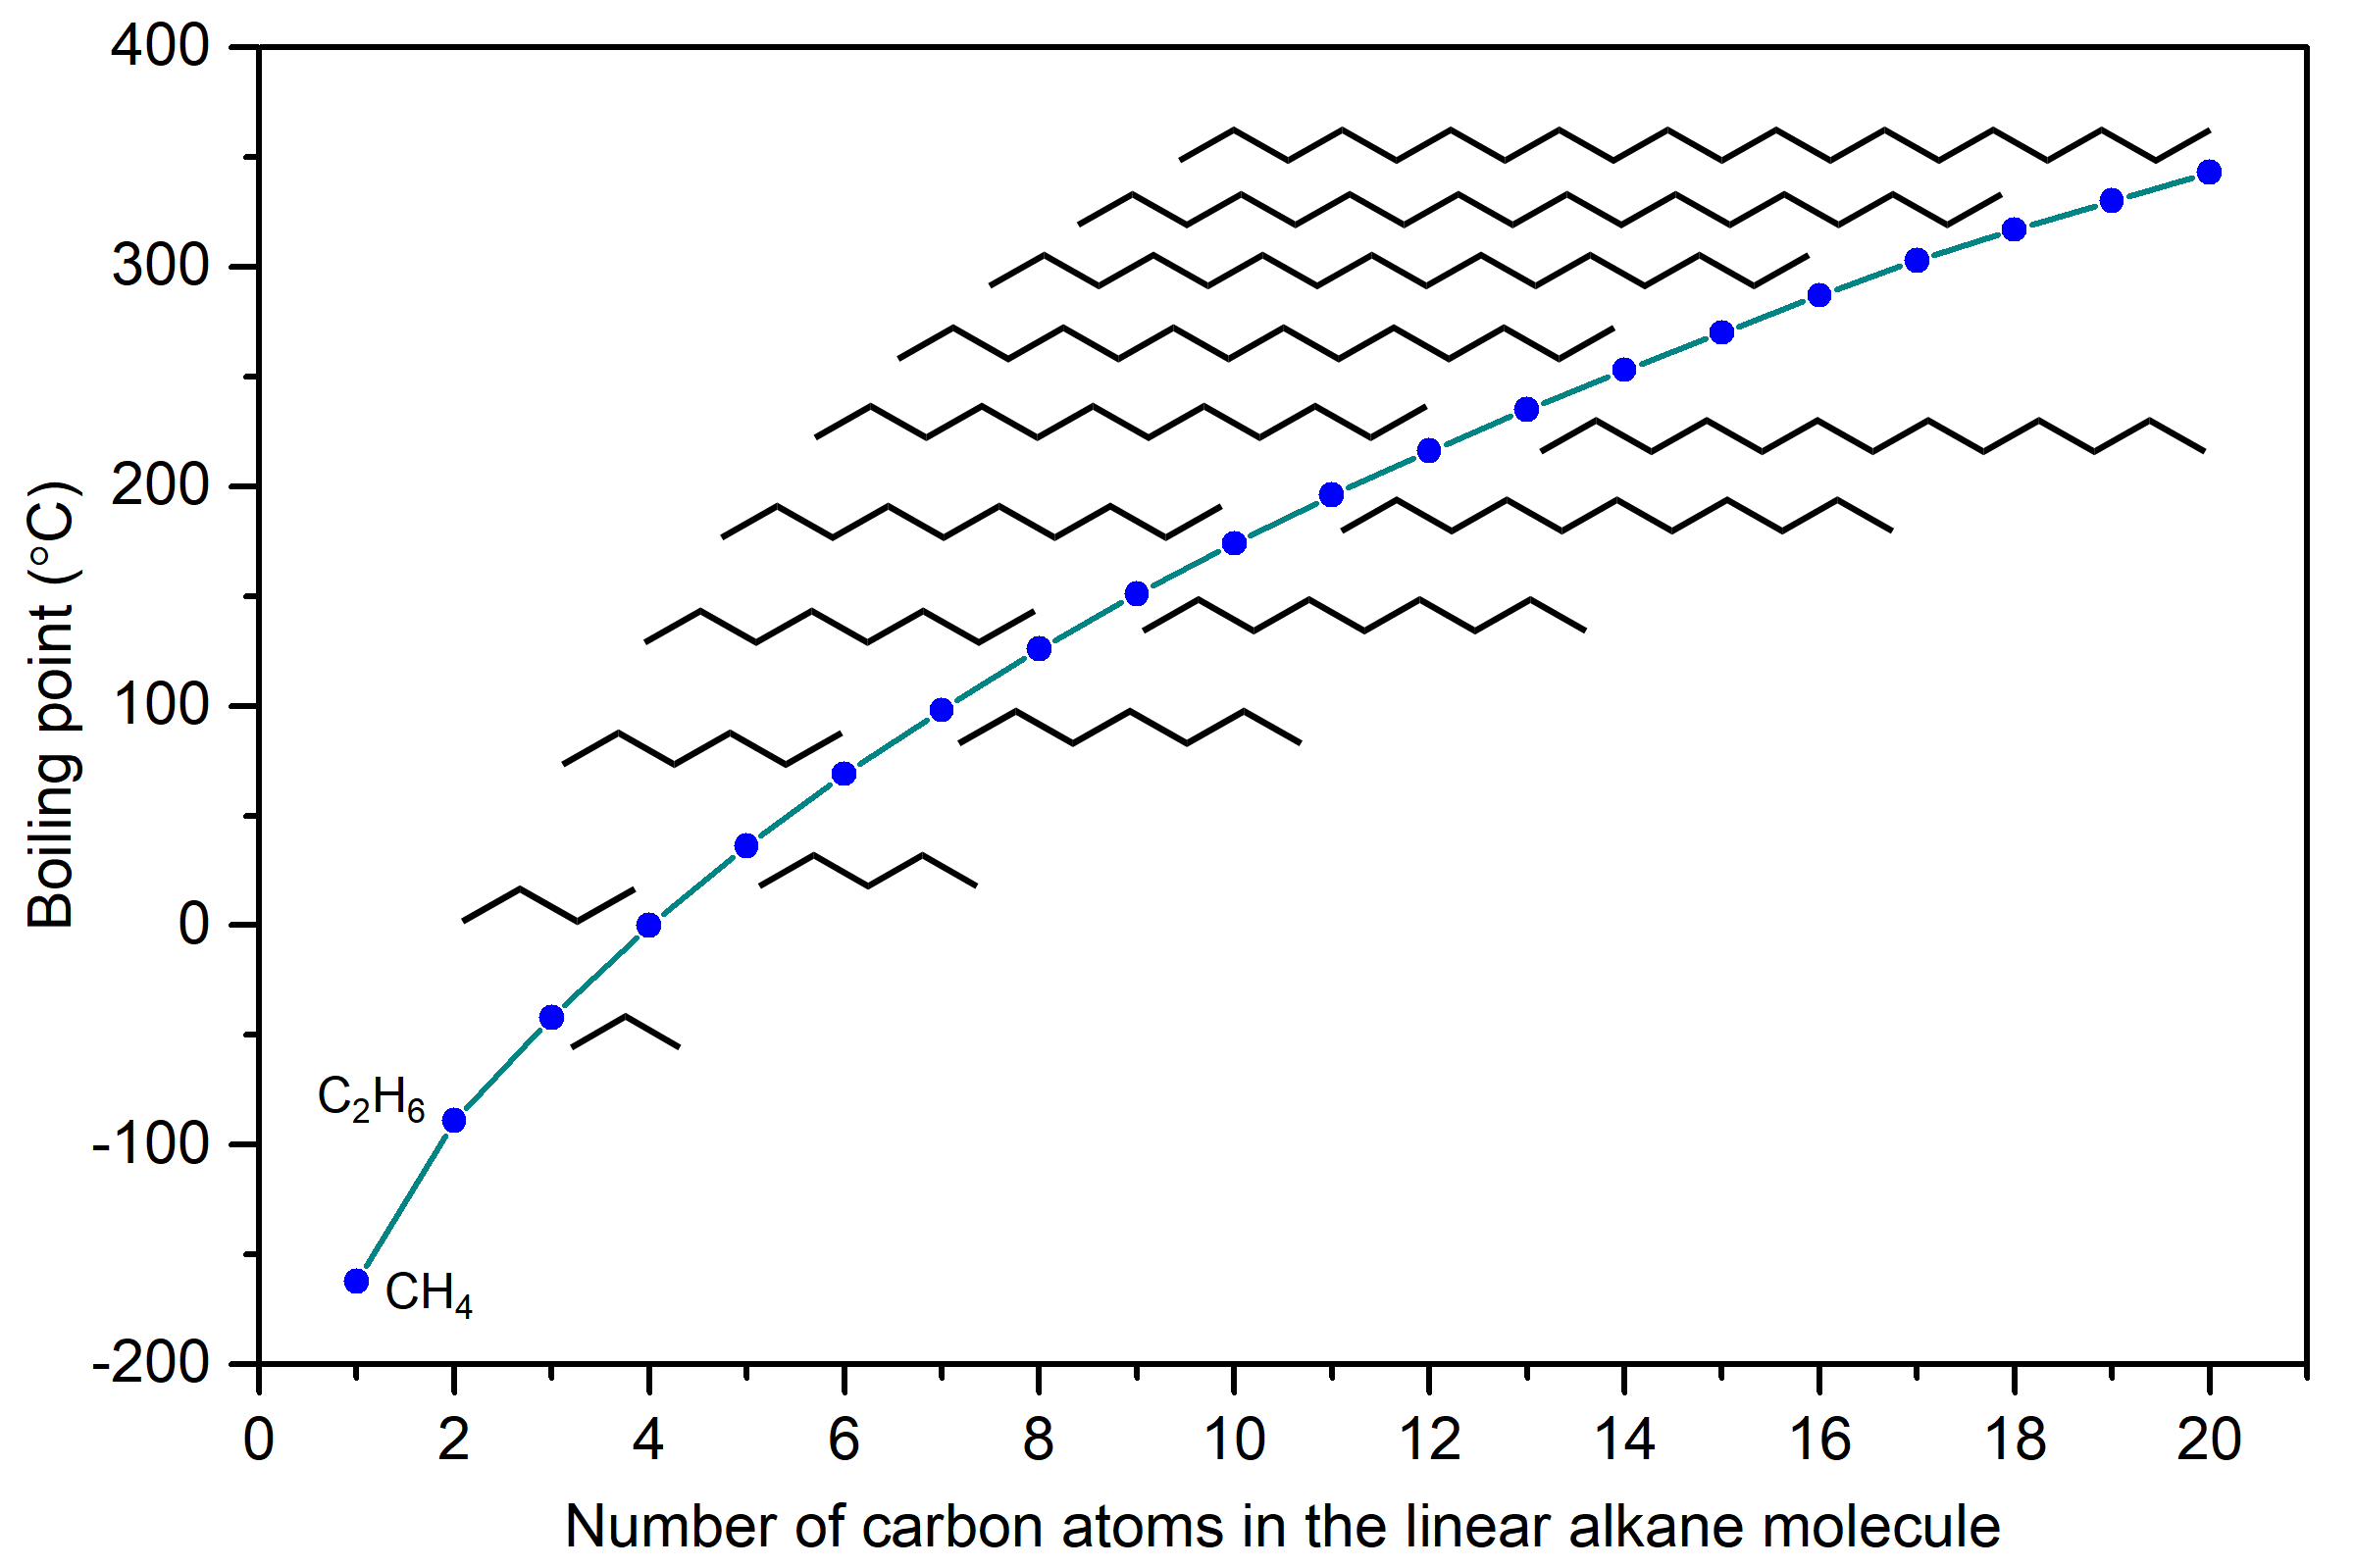 Graph of boiling points in degrees Celsius as a function of carbon atoms in the linear alkane molecule from a single carbon up to 20 carbon atoms showing logarithmic growth.